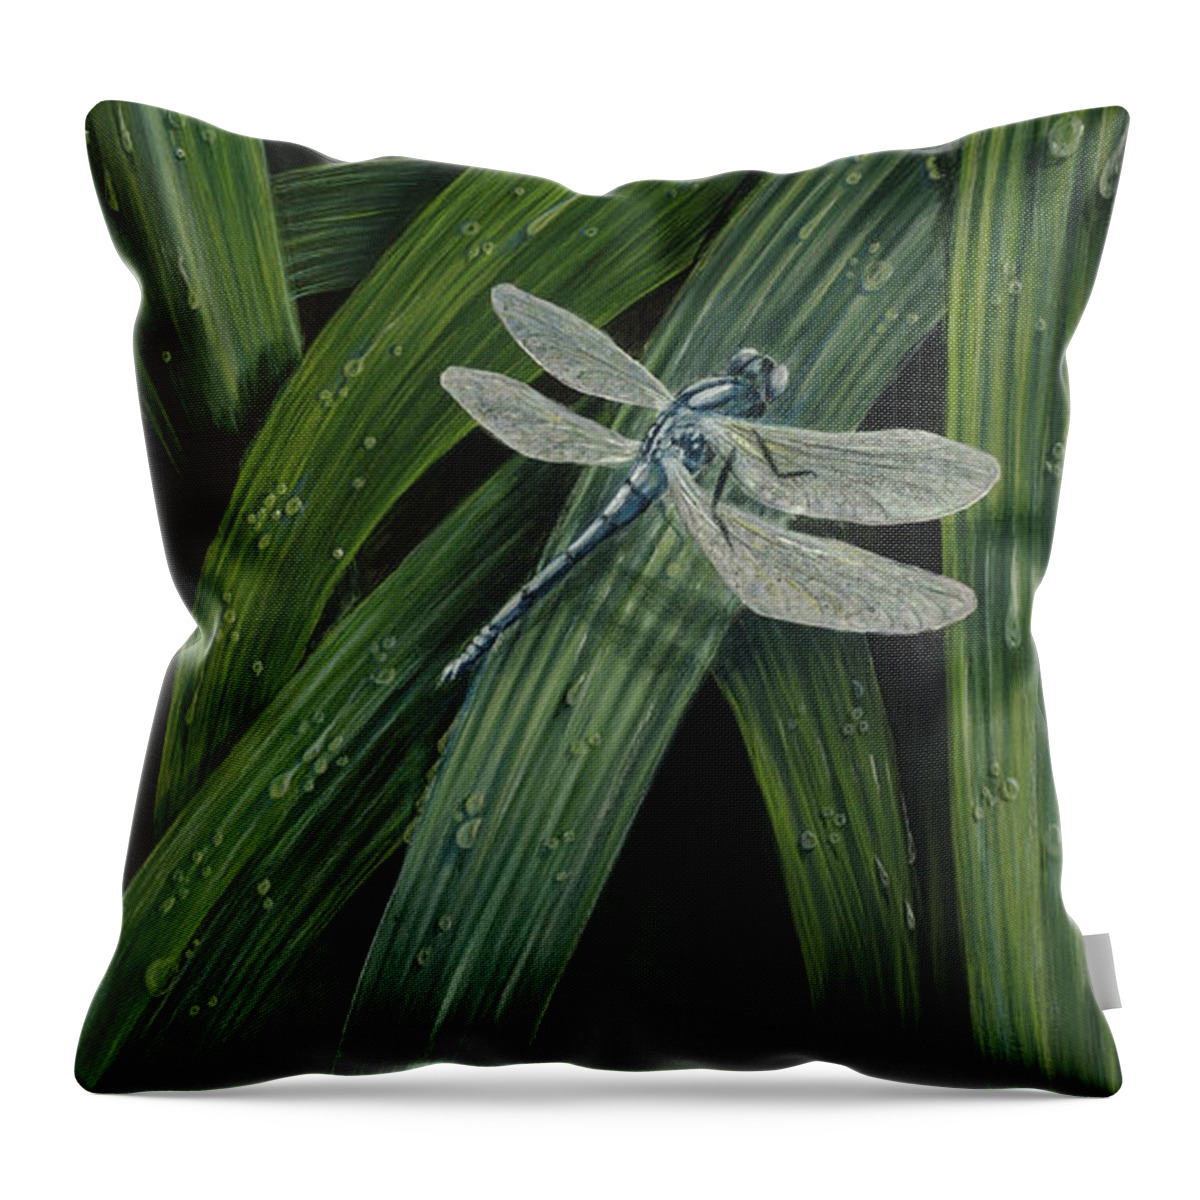 Dragonfly Throw Pillow featuring the painting A Moment's Respite by Thomas Hamm